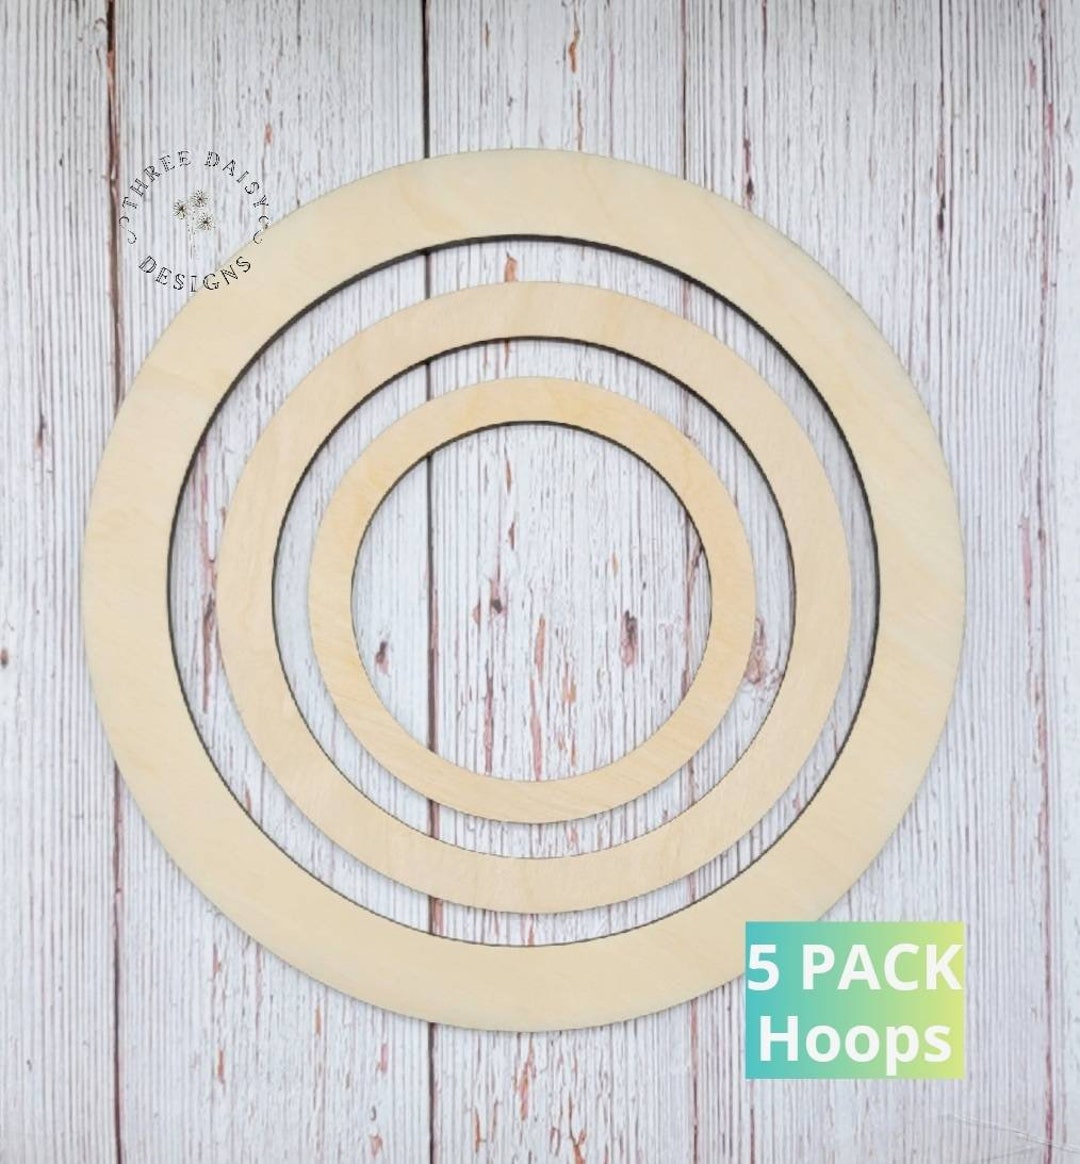 QTY 1 Various Sized Wood Rings 1/4 Thick, Wood Ring Shape, Circle Frame,  Round Picture Frame, Door Wreath, Wood Craft Shapes, DIY Crafts 